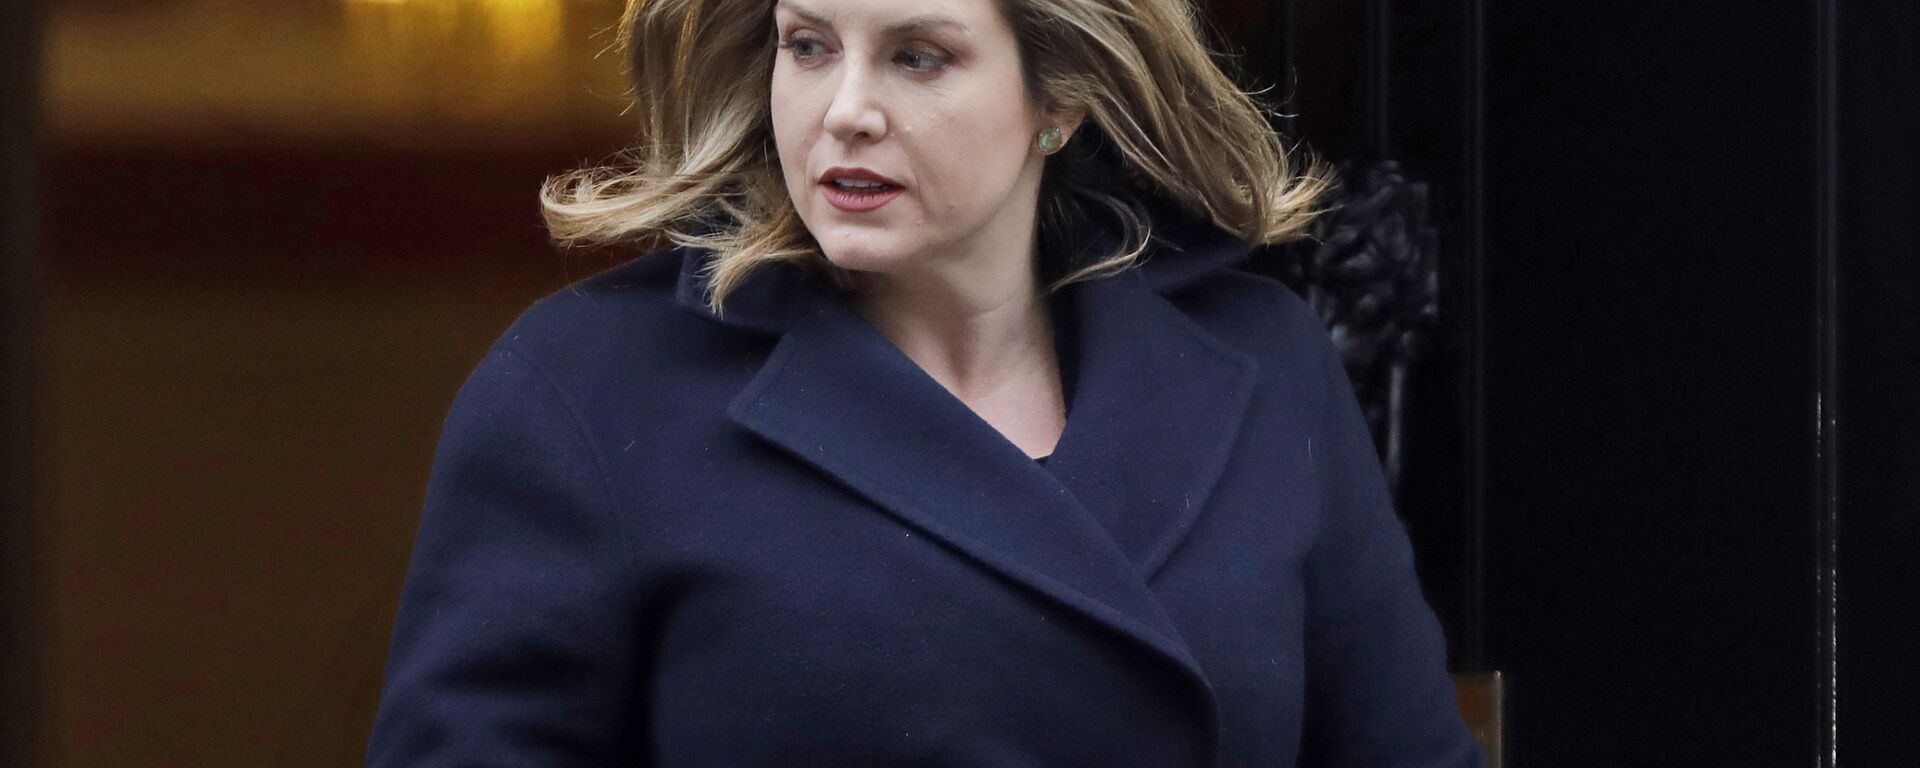 In this file photo dated Tuesday, Jan. 29, 2019, Government minister Penny Mordaunt leaves after a Cabinet meeting at Downing Street in London. The international development secretary, Mordaunt has been appointed to replace Gavin Williamson who was sacked Wednesday May 2, 2019, as U.K. defense chief.  - Sputnik International, 1920, 19.07.2022